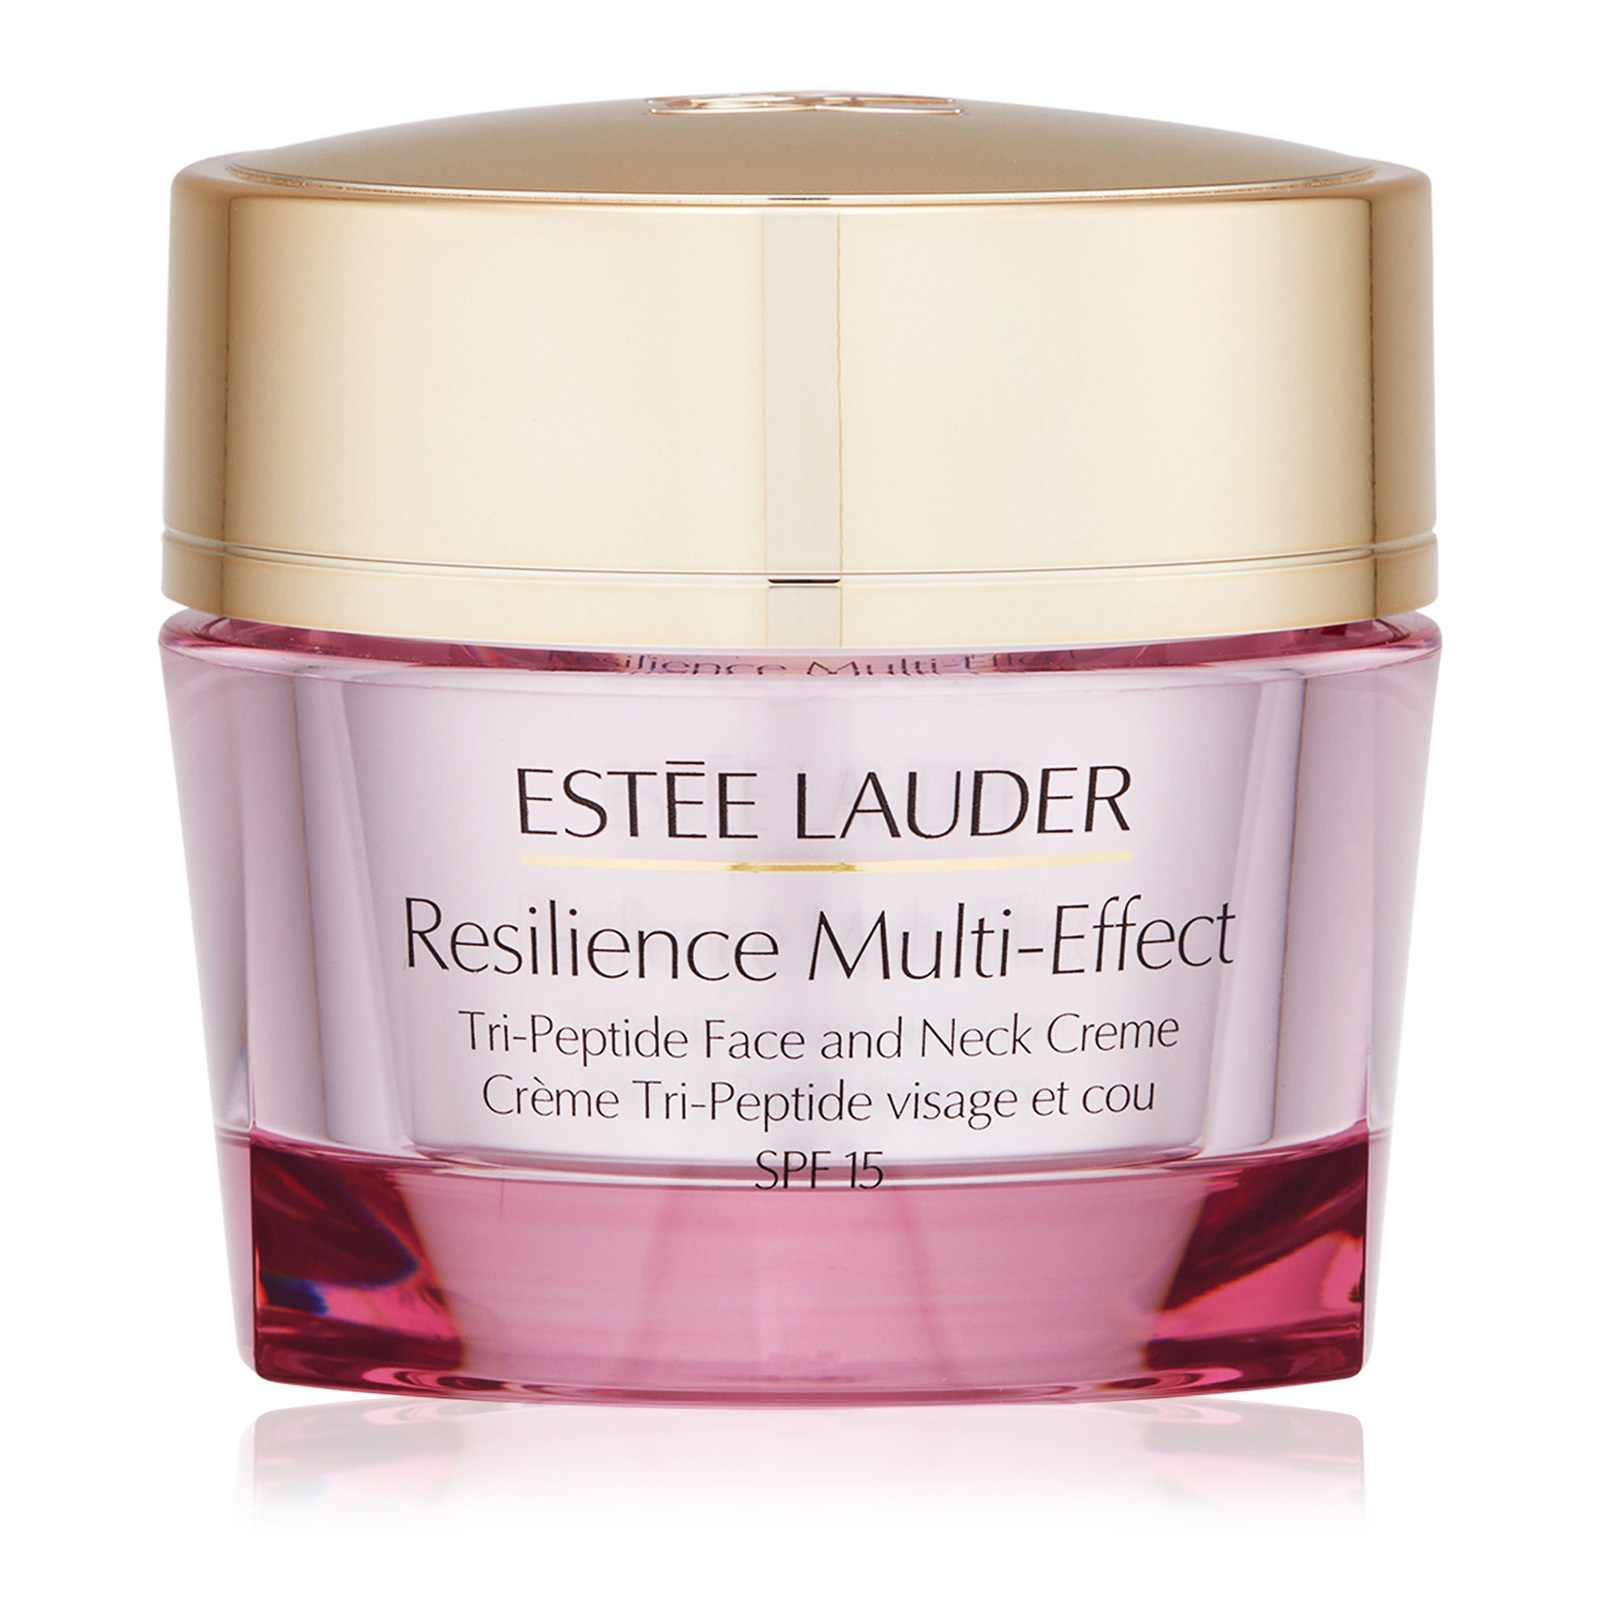 Resilience Multi-Effect Tri-Peptide Face and Neck Creme SPF 15 (Dry Skin)